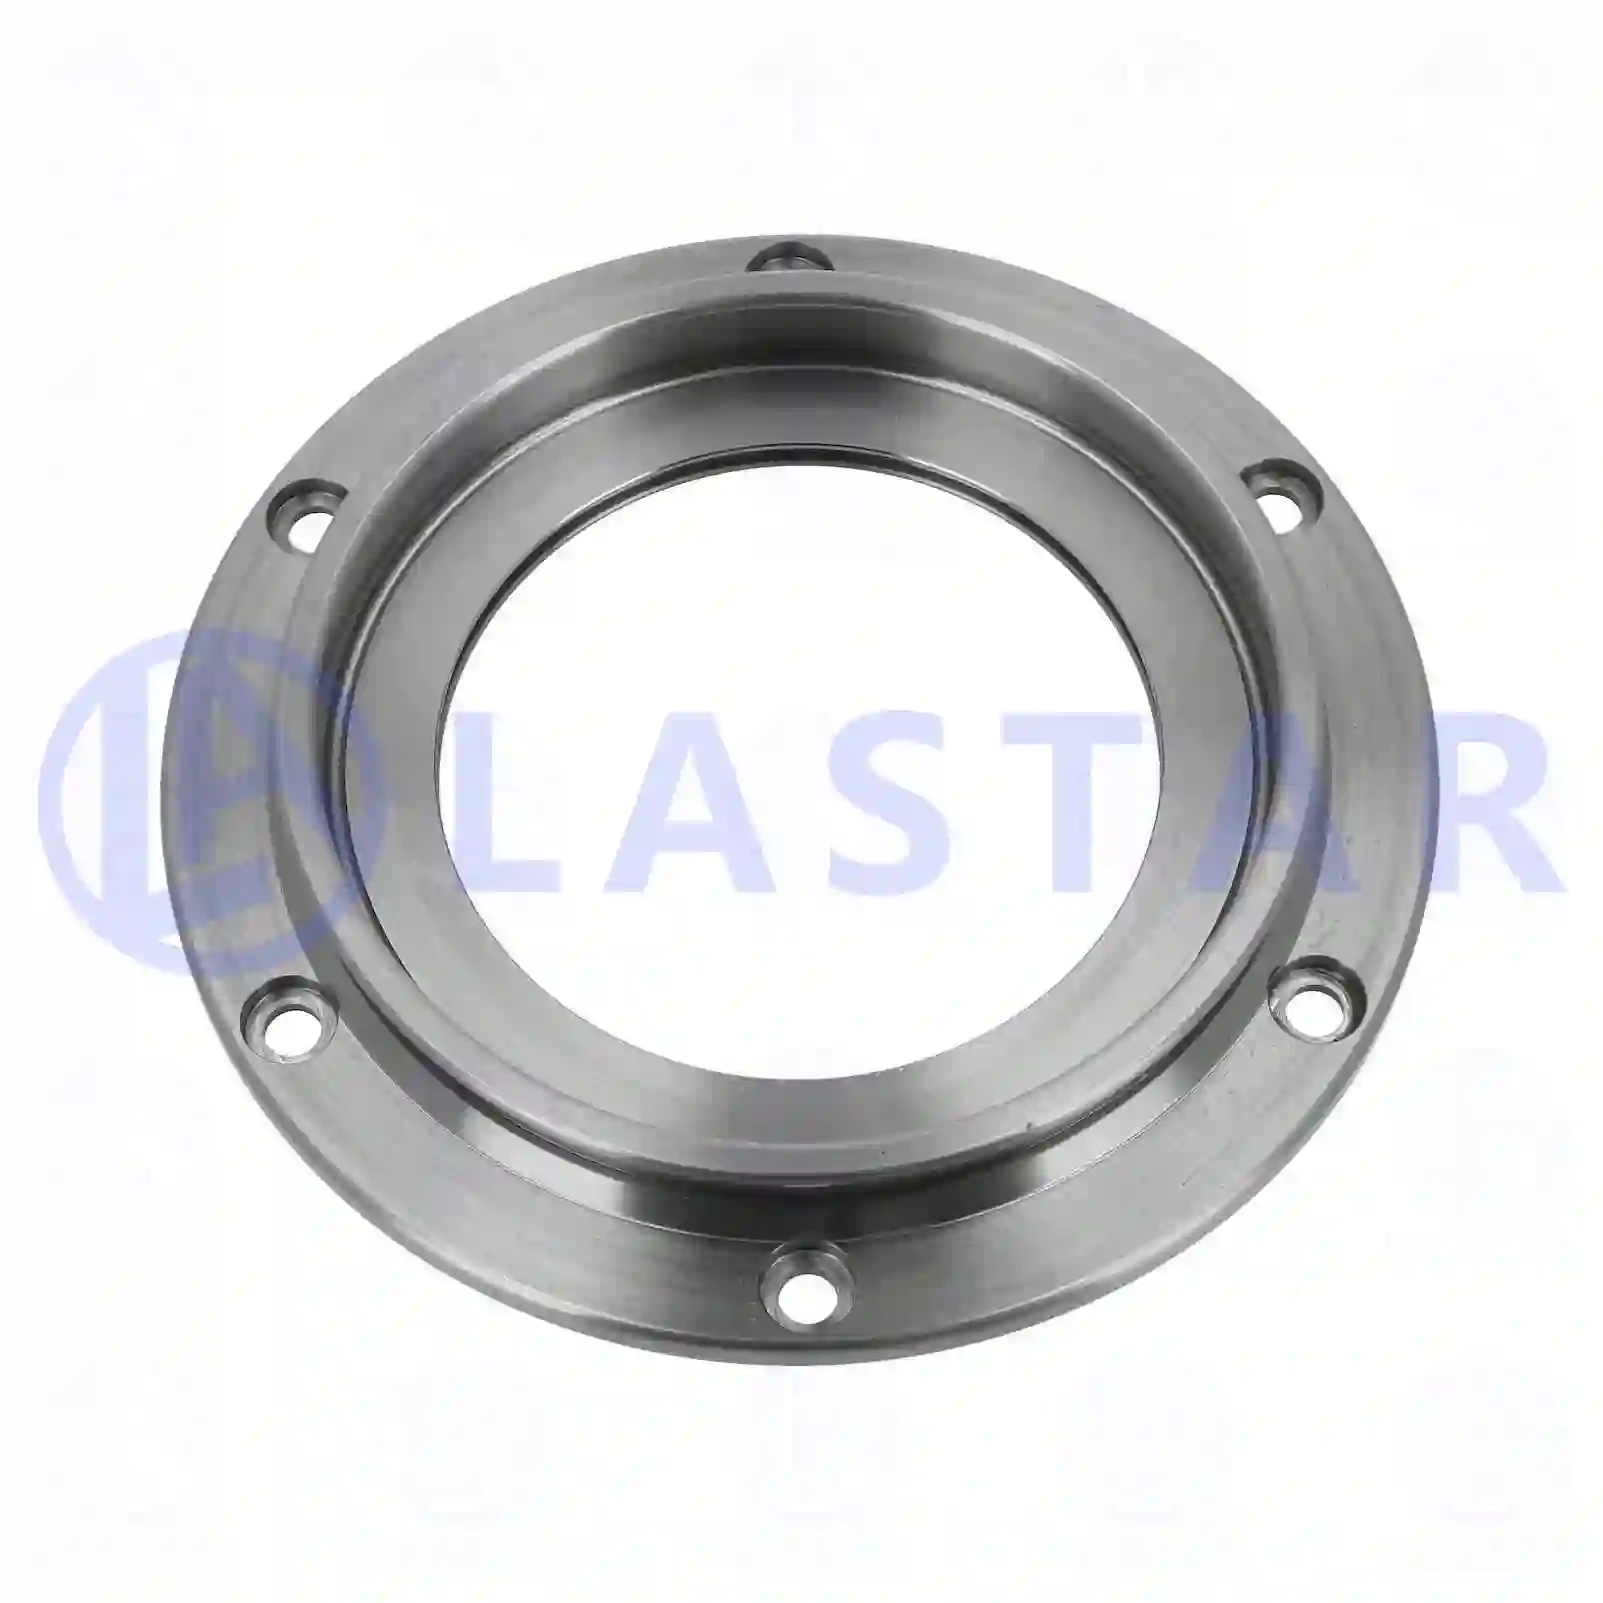 Spacer ring, 77730238, 204727, , ||  77730238 Lastar Spare Part | Truck Spare Parts, Auotomotive Spare Parts Spacer ring, 77730238, 204727, , ||  77730238 Lastar Spare Part | Truck Spare Parts, Auotomotive Spare Parts